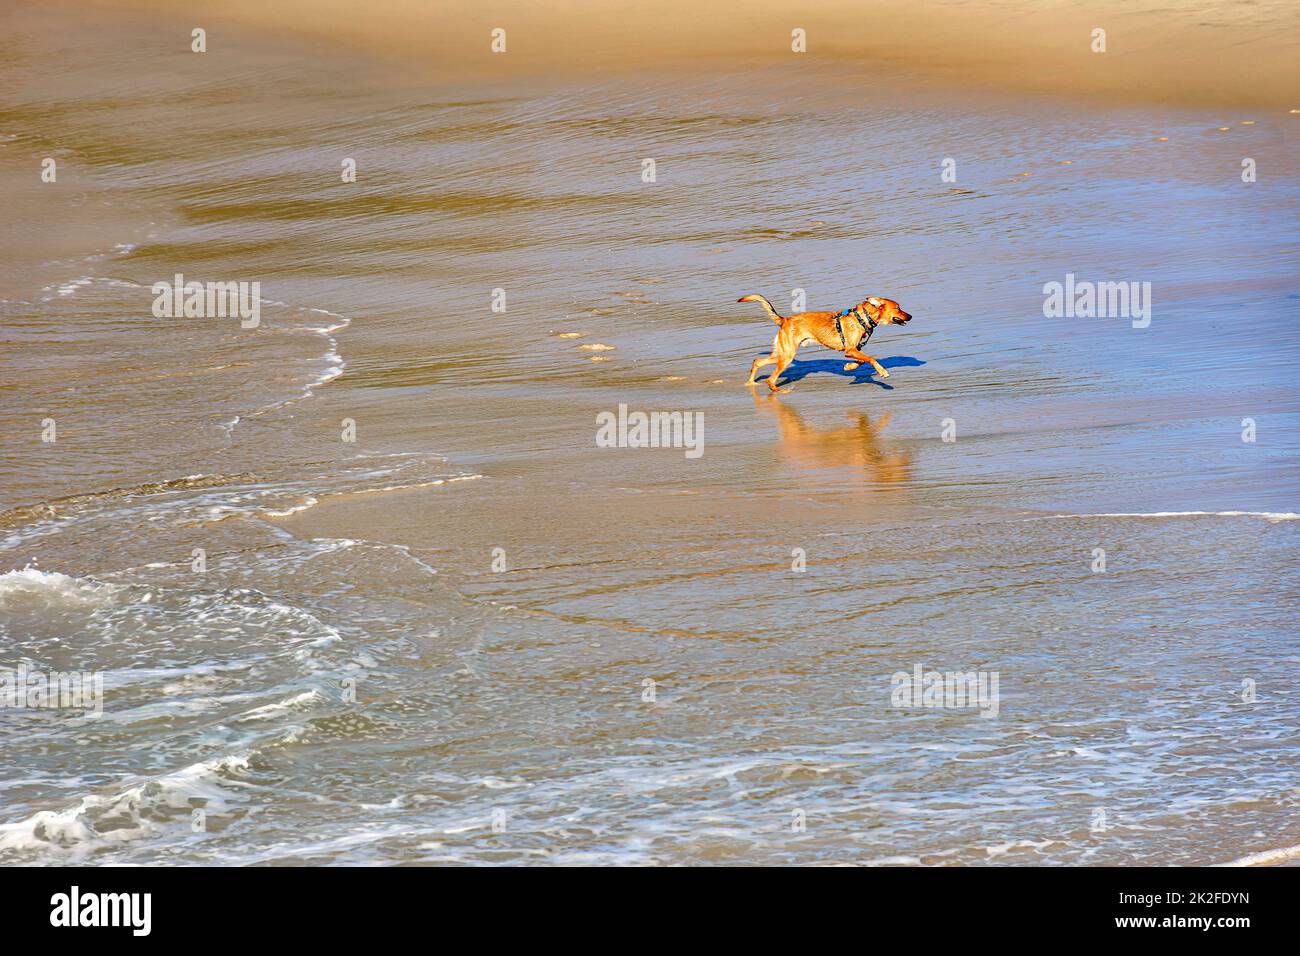 Dogs running and playing on the beach water in the morning Stock Photo